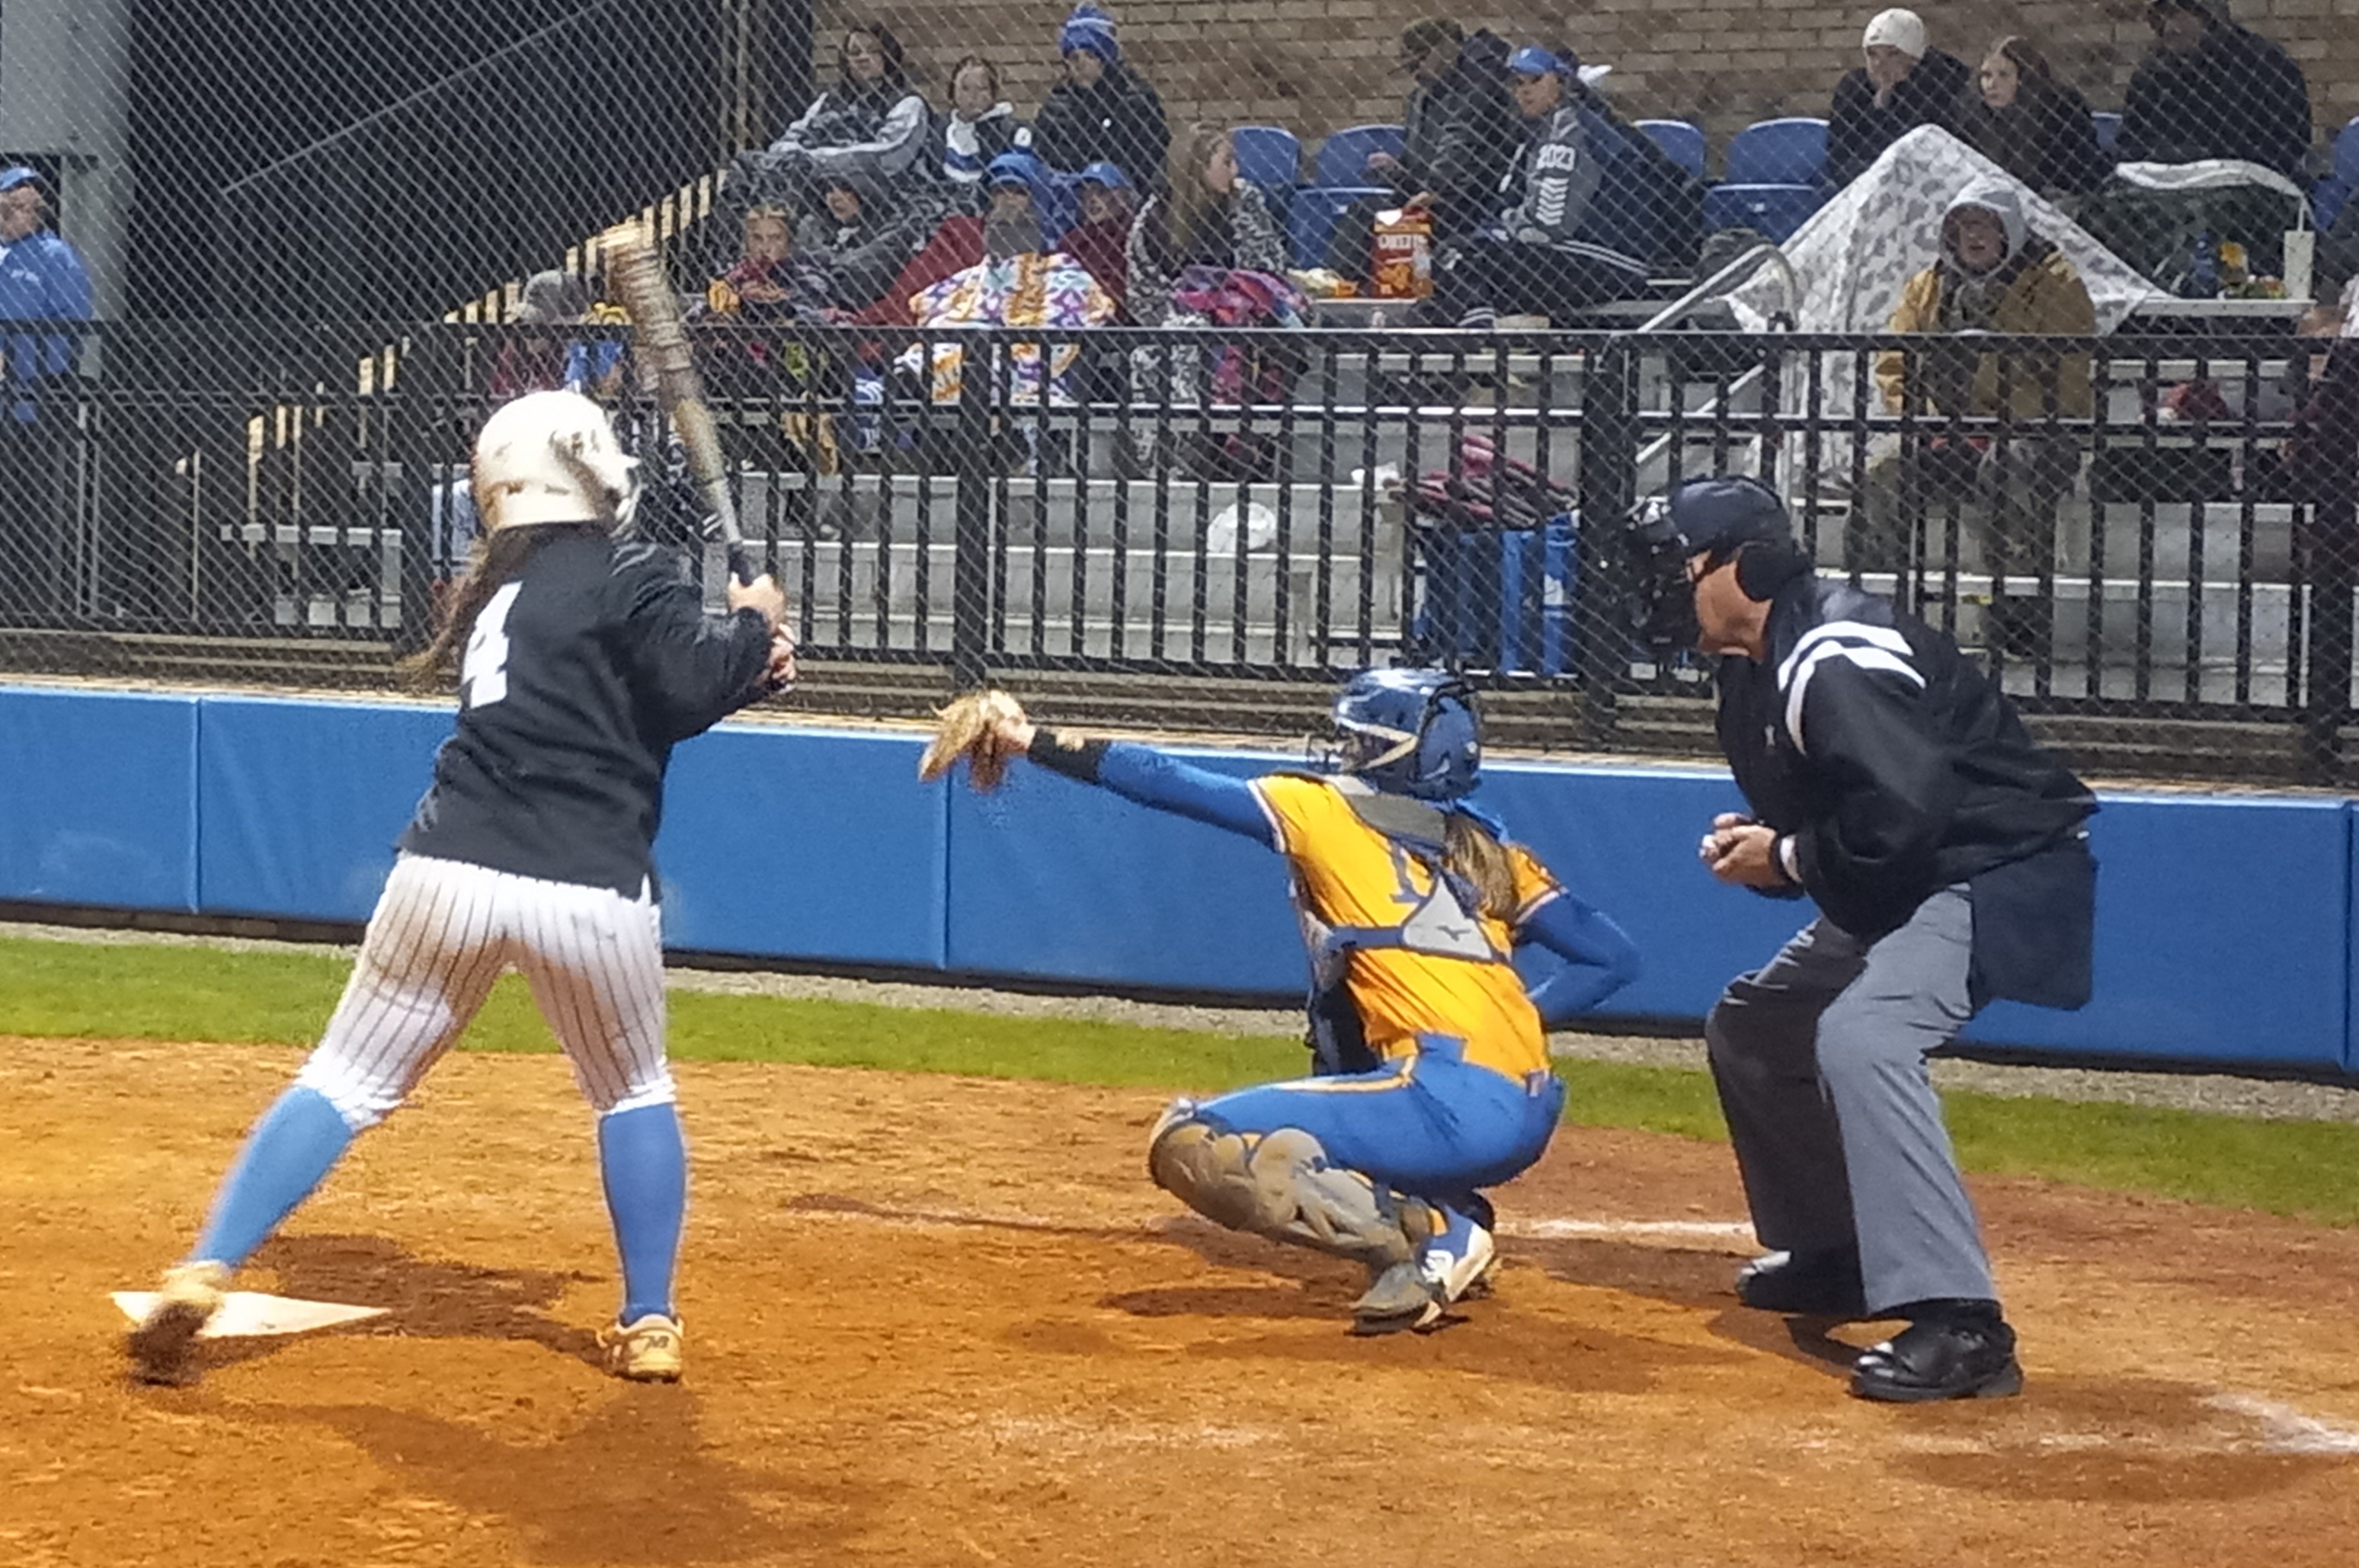 Piedmont catcher Jenna Calvert frames one up as White Plains’ Callie Richardson looks on during their game in the Piedmont Invitational on Saturday. (Photo by Joe Medley)